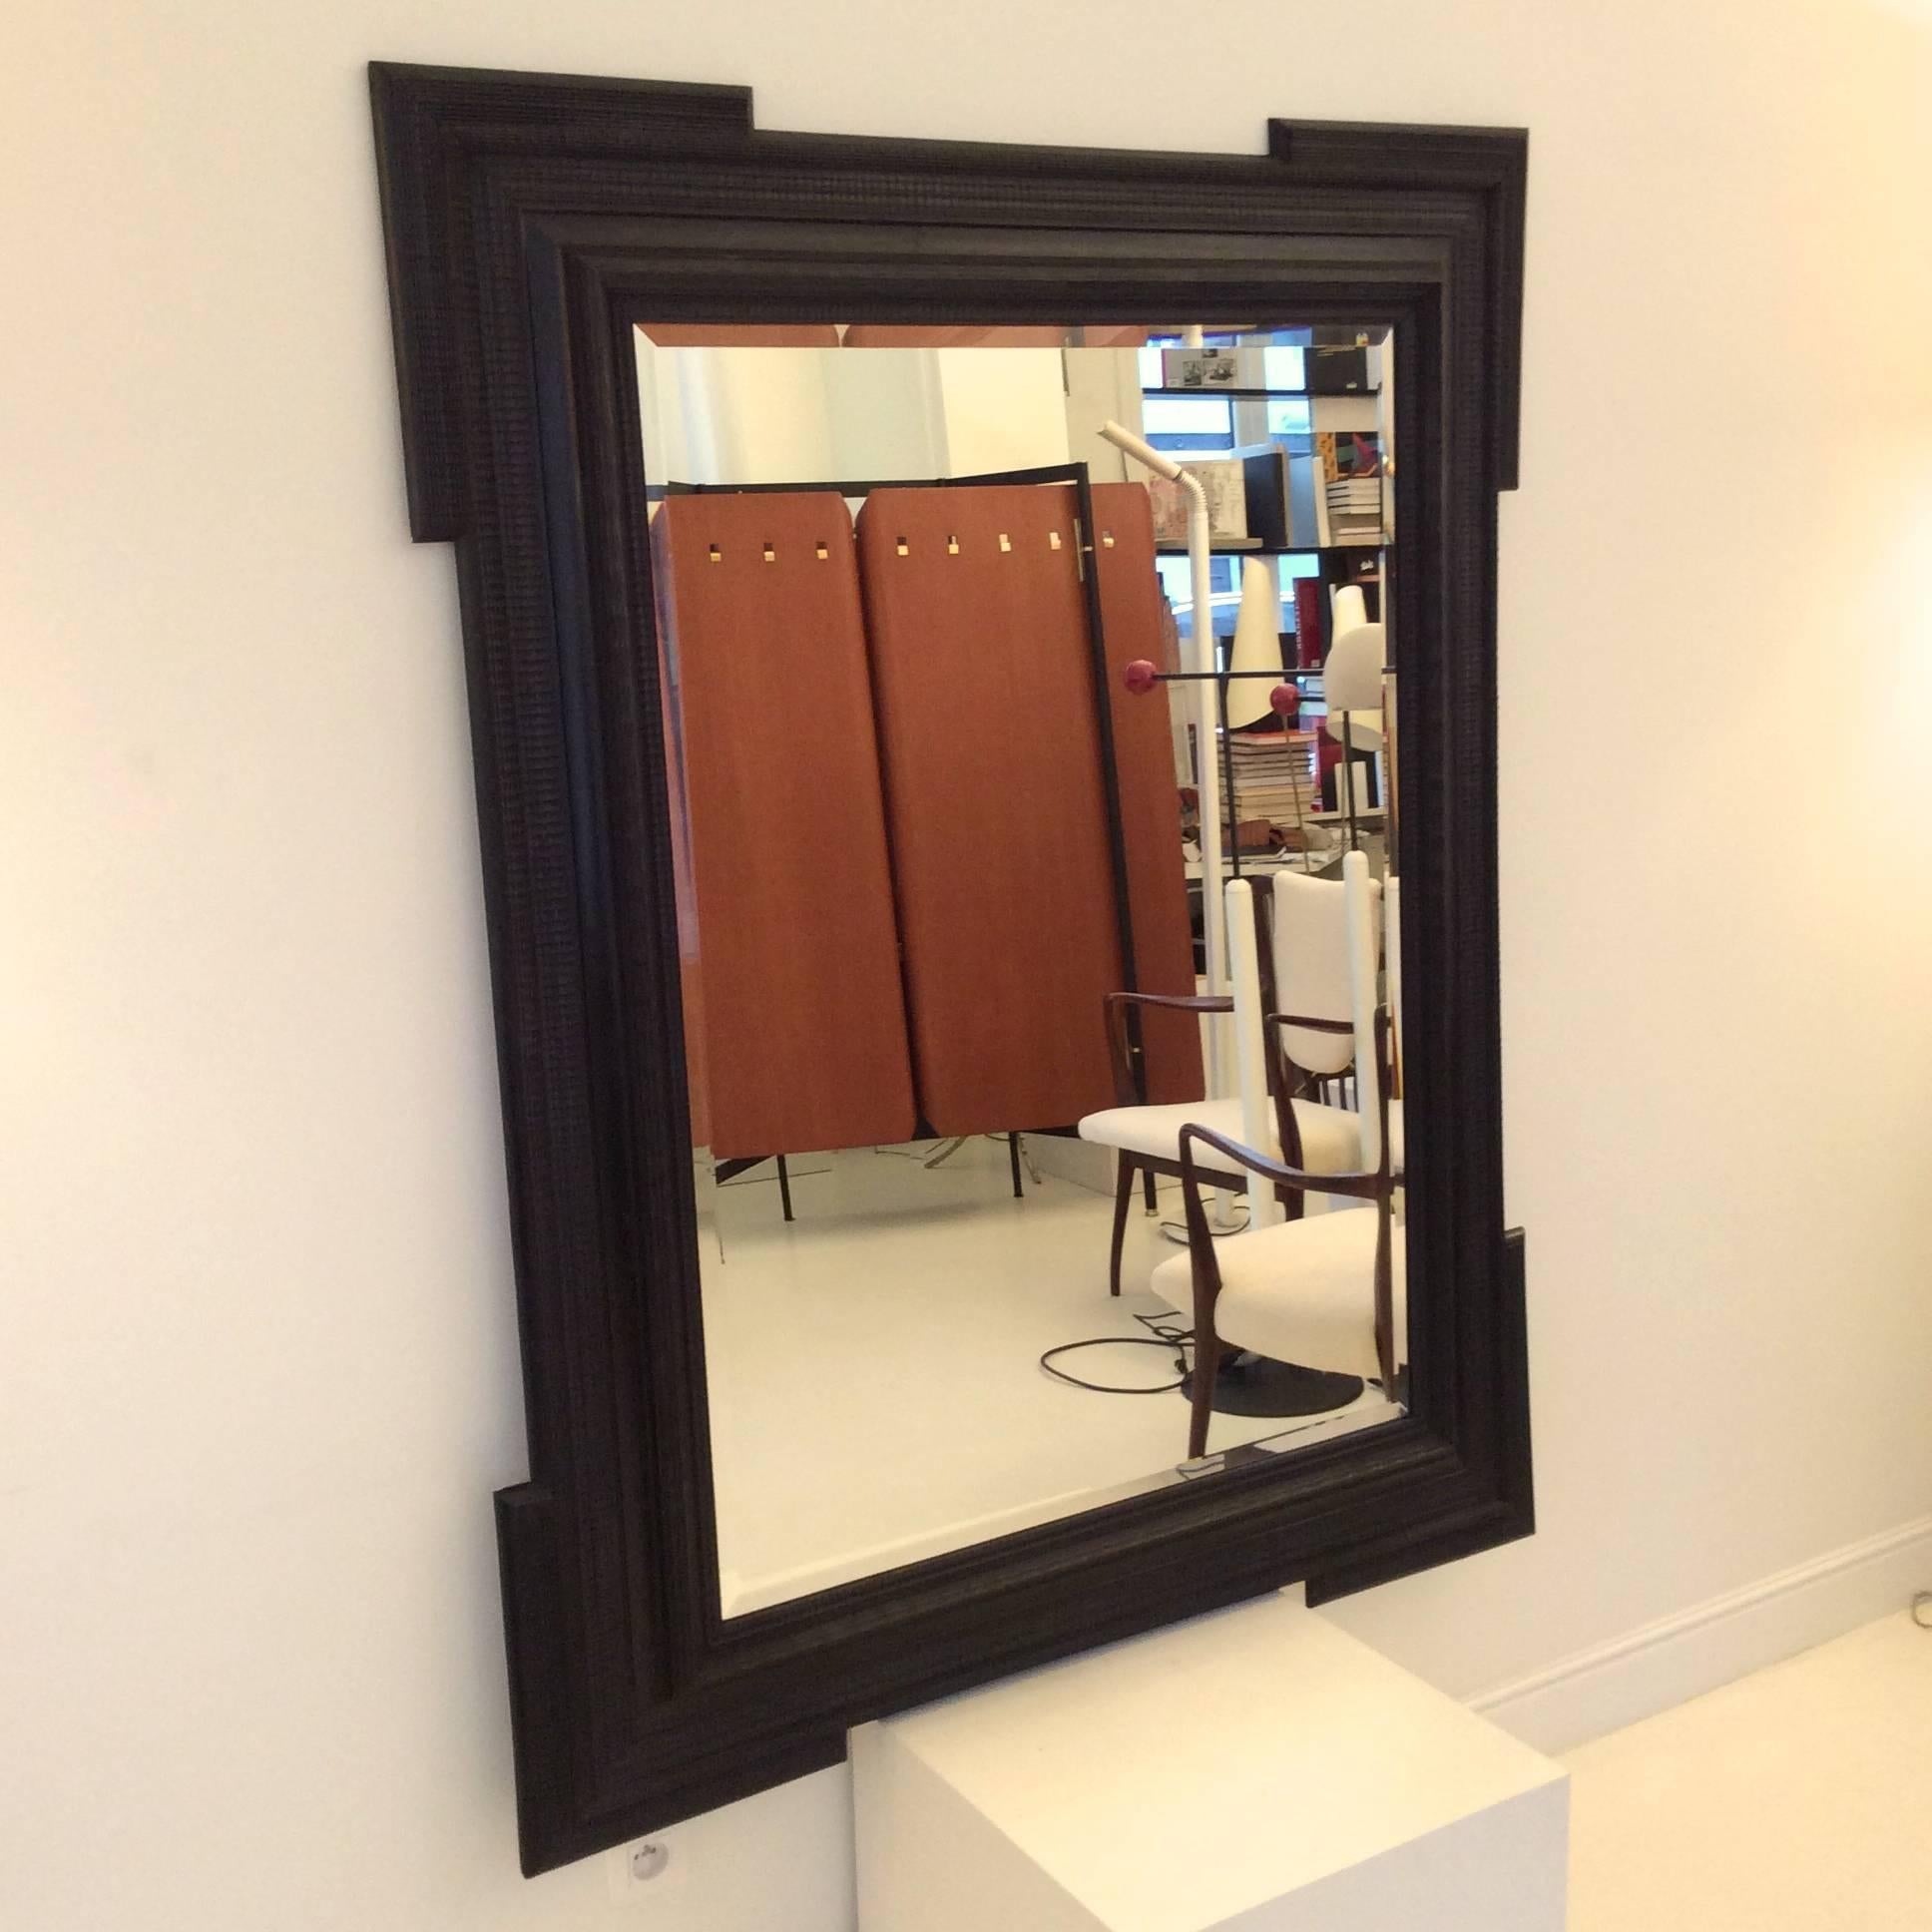 Large black lacquered wood mirror,
circa 1930, Italy.
Wavy molding, new beveled mirror.
Measure: H 158 cm, W 125 cm, D 7 cm.
Good condition.